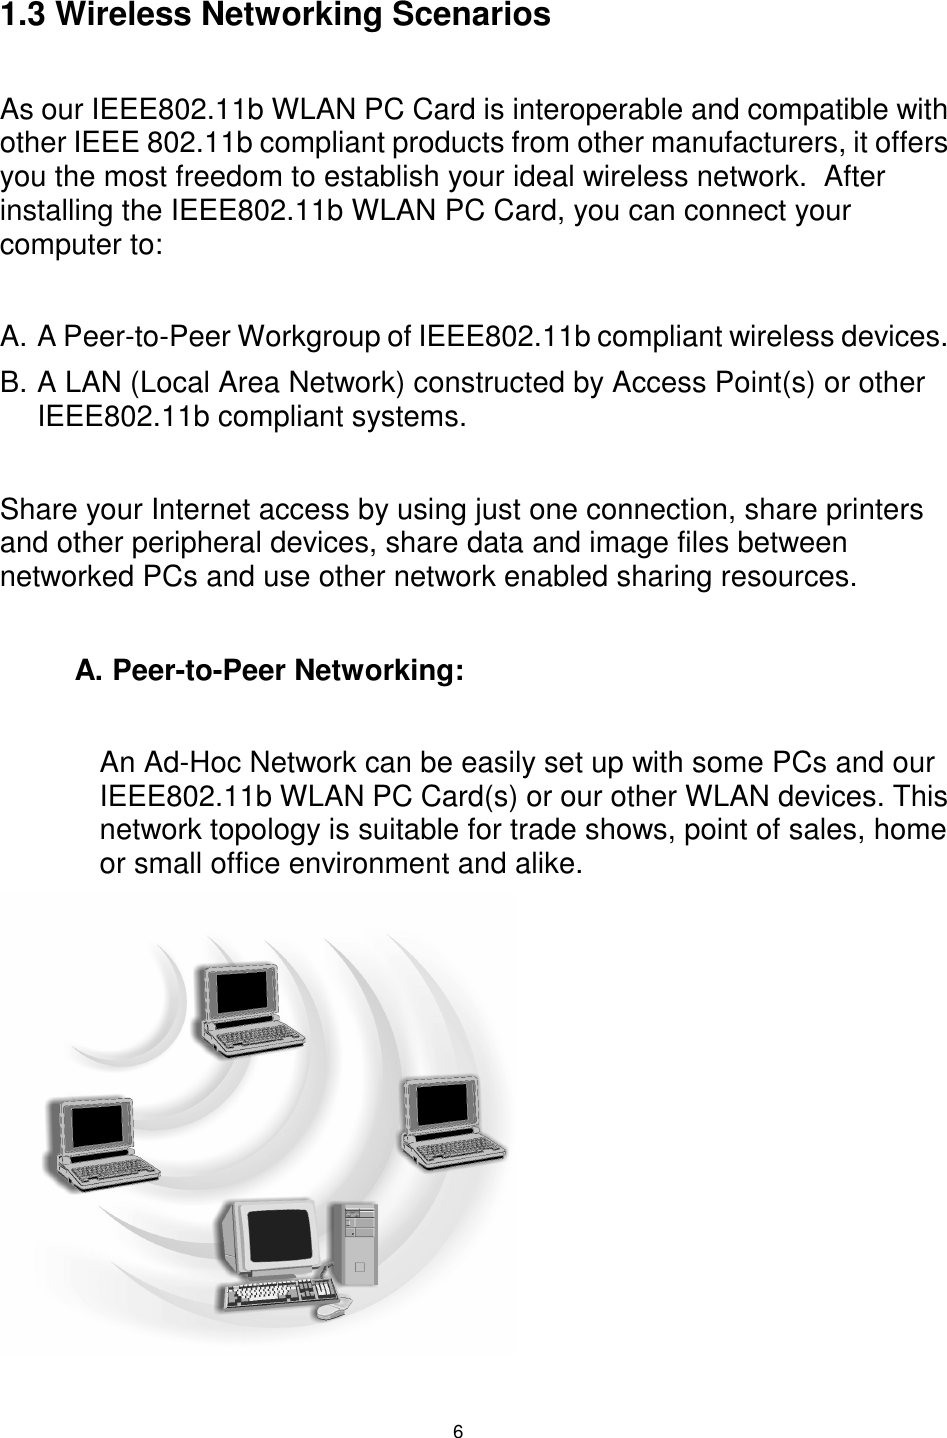  6 1.3 Wireless Networking Scenarios  As our IEEE802.11b WLAN PC Card is interoperable and compatible with other IEEE 802.11b compliant products from other manufacturers, it offers you the most freedom to establish your ideal wireless network.  After installing the IEEE802.11b WLAN PC Card, you can connect your computer to:  A. A Peer-to-Peer Workgroup of IEEE802.11b compliant wireless devices. B. A LAN (Local Area Network) constructed by Access Point(s) or other IEEE802.11b compliant systems.  Share your Internet access by using just one connection, share printers and other peripheral devices, share data and image files between networked PCs and use other network enabled sharing resources.  A. Peer-to-Peer Networking:  An Ad-Hoc Network can be easily set up with some PCs and our IEEE802.11b WLAN PC Card(s) or our other WLAN devices. This network topology is suitable for trade shows, point of sales, home or small office environment and alike.  